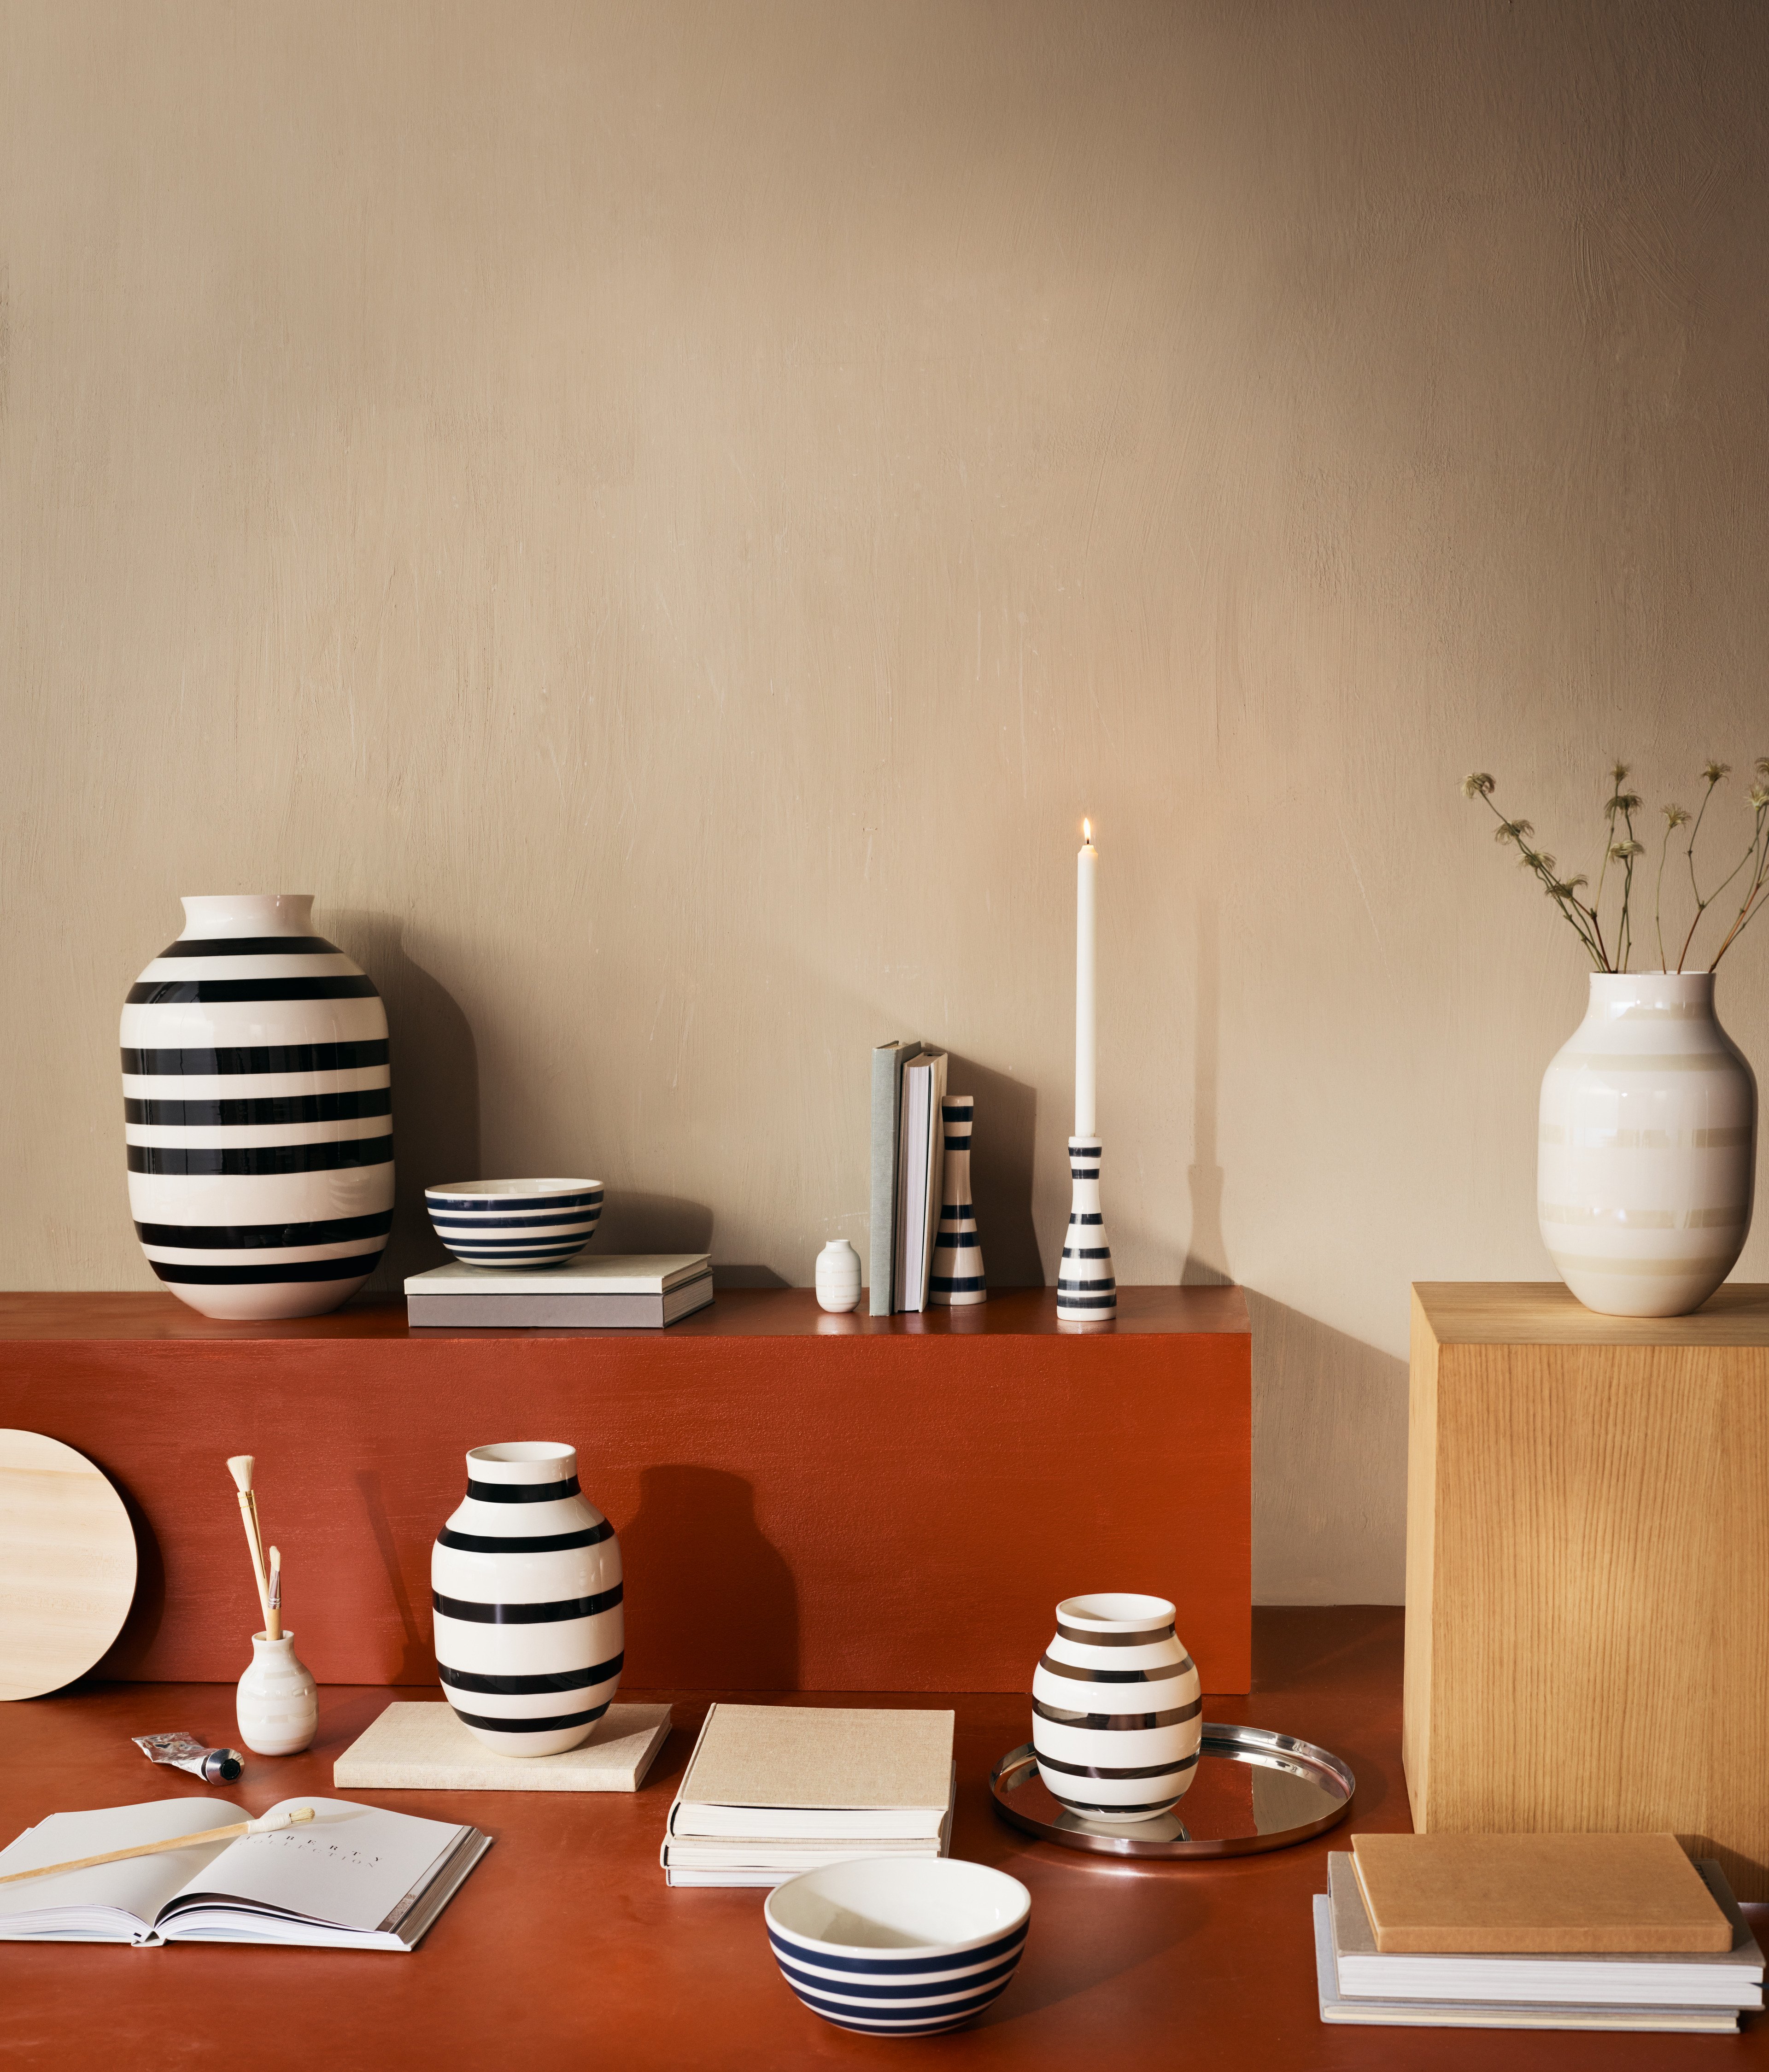 Vases, bowls and candlesticks from the Kähler Omaggio series